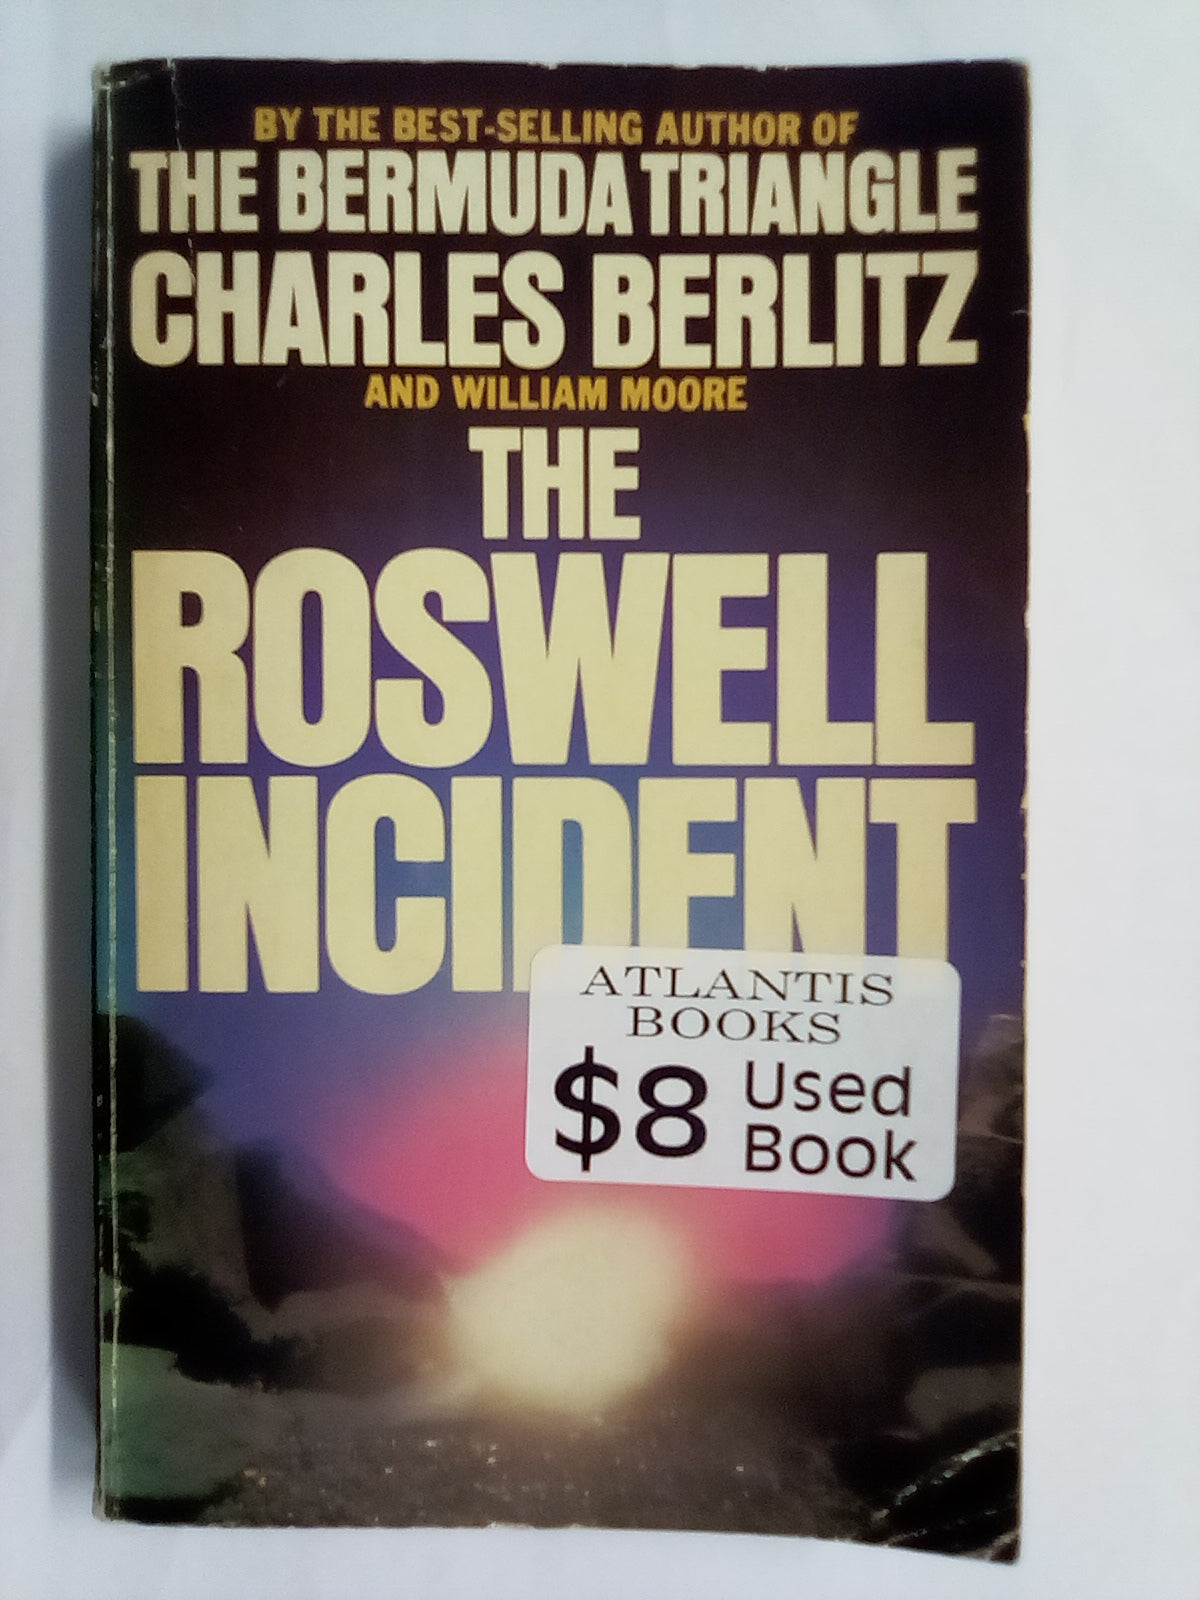 The Roswell Incident by Charles Berlitz